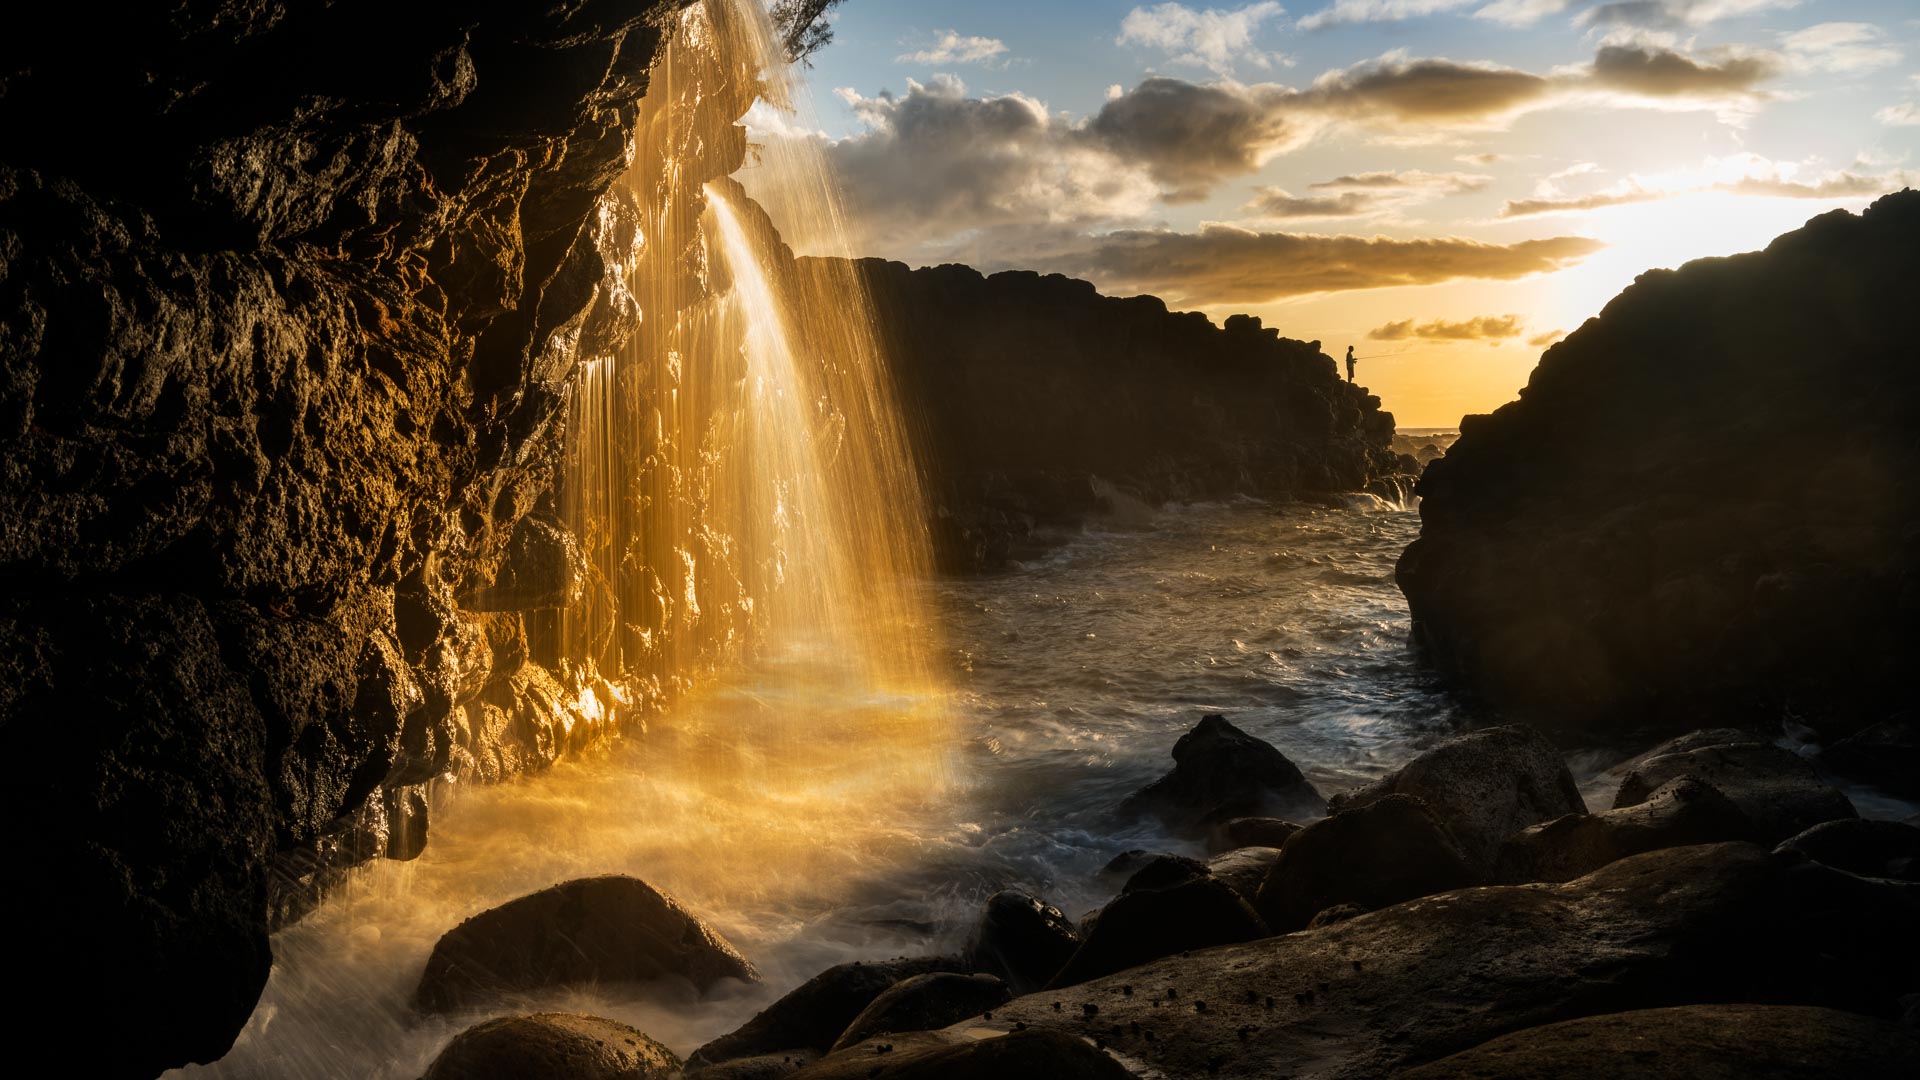 The ten places you must visit on Kauai